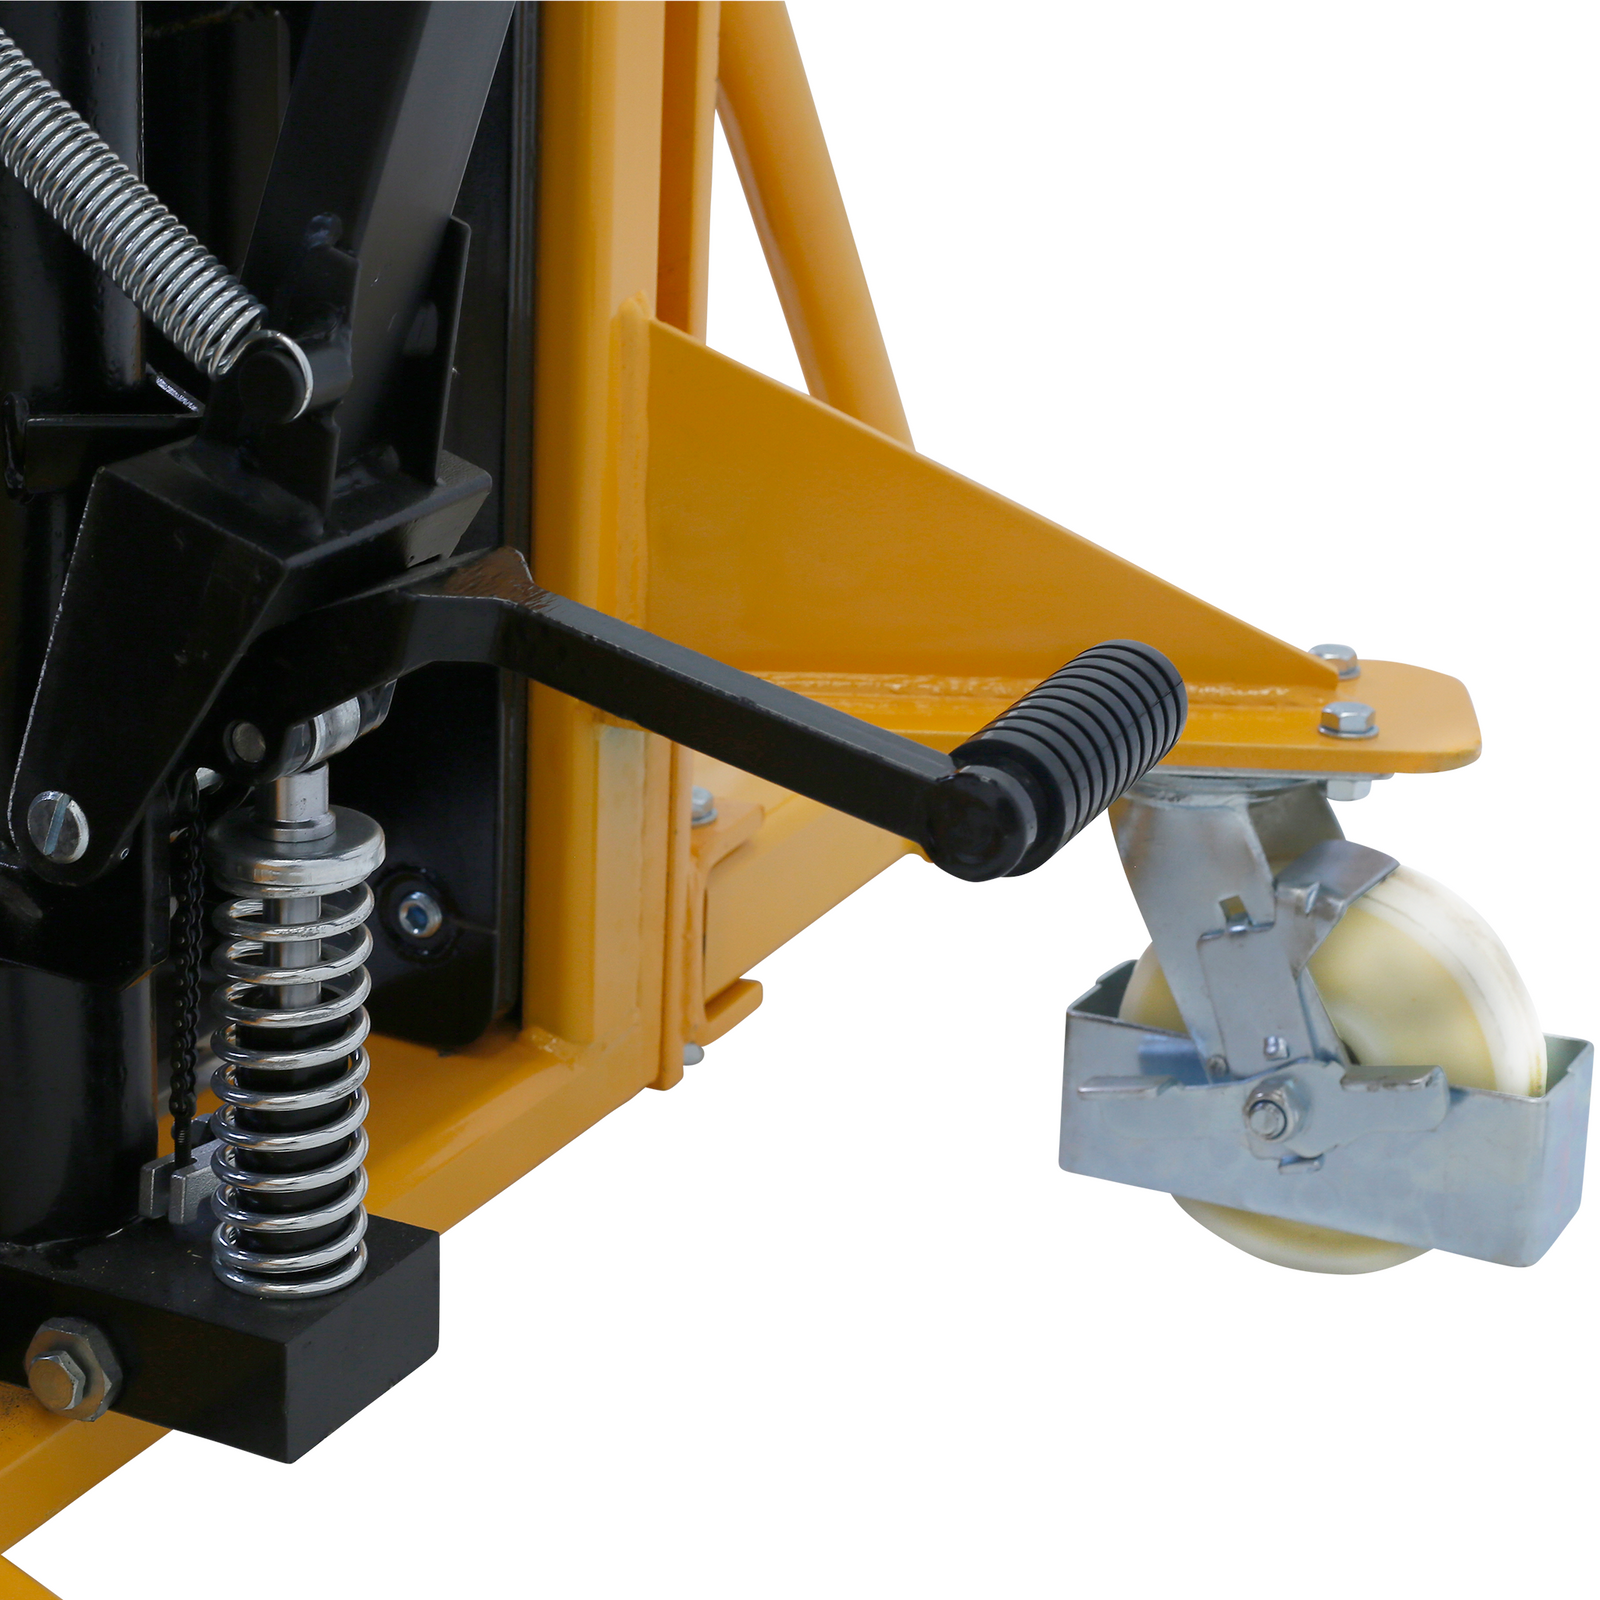 Close up showing part of the mechanism of the black and yellow pallet stacker